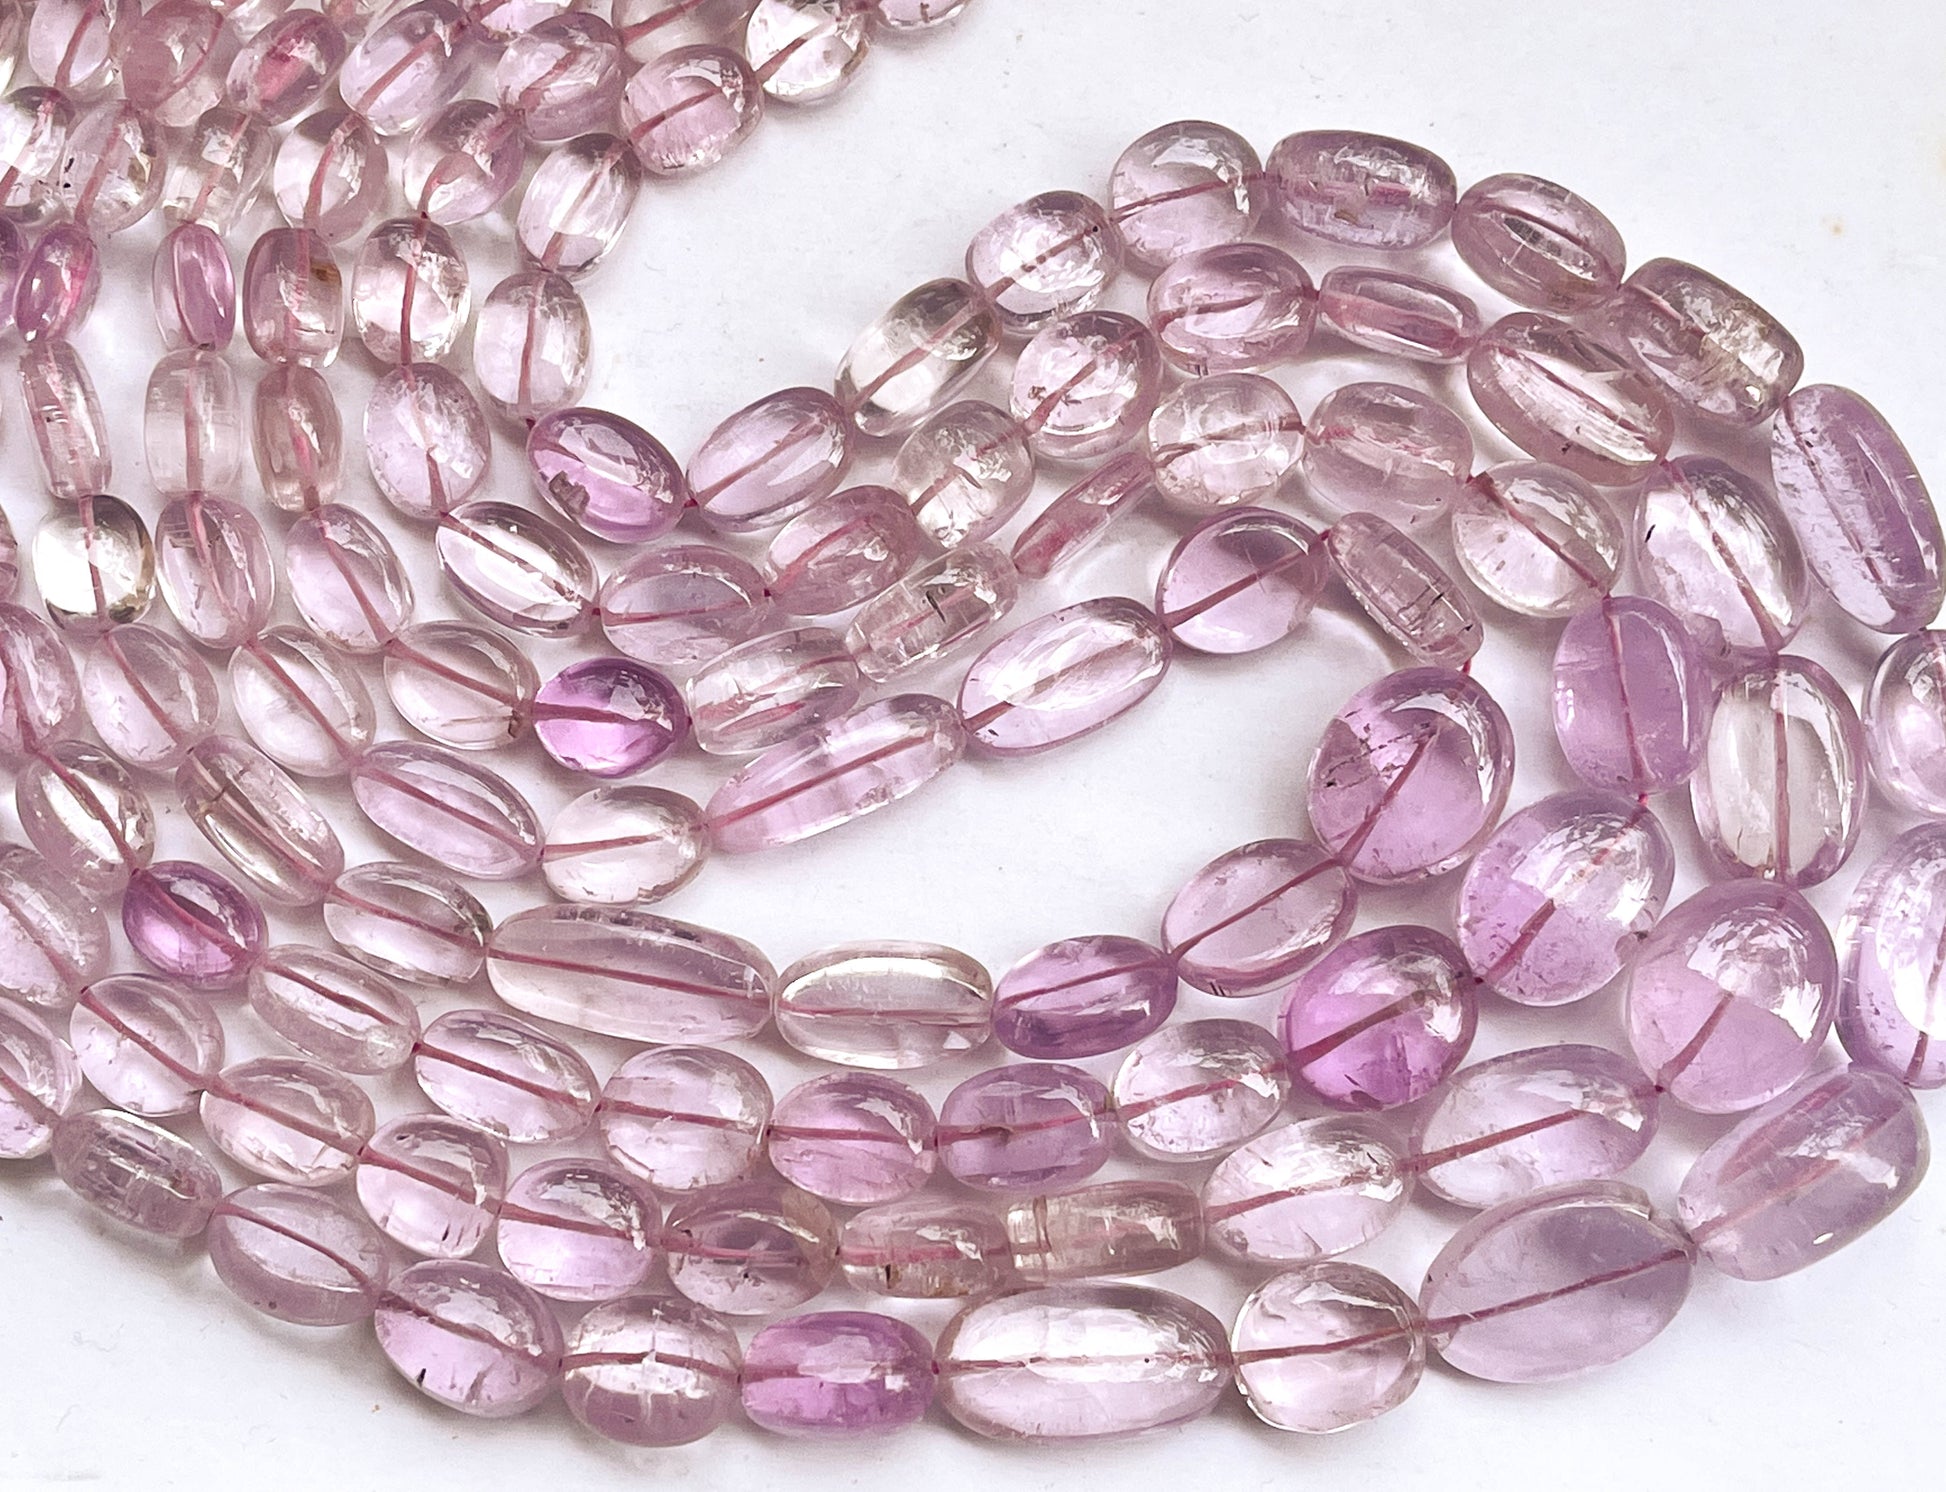 Natural Pink Kunzite Smooth Tumble or Nuggets Shape Beads | 20 Inch Beadsforyourjewelry